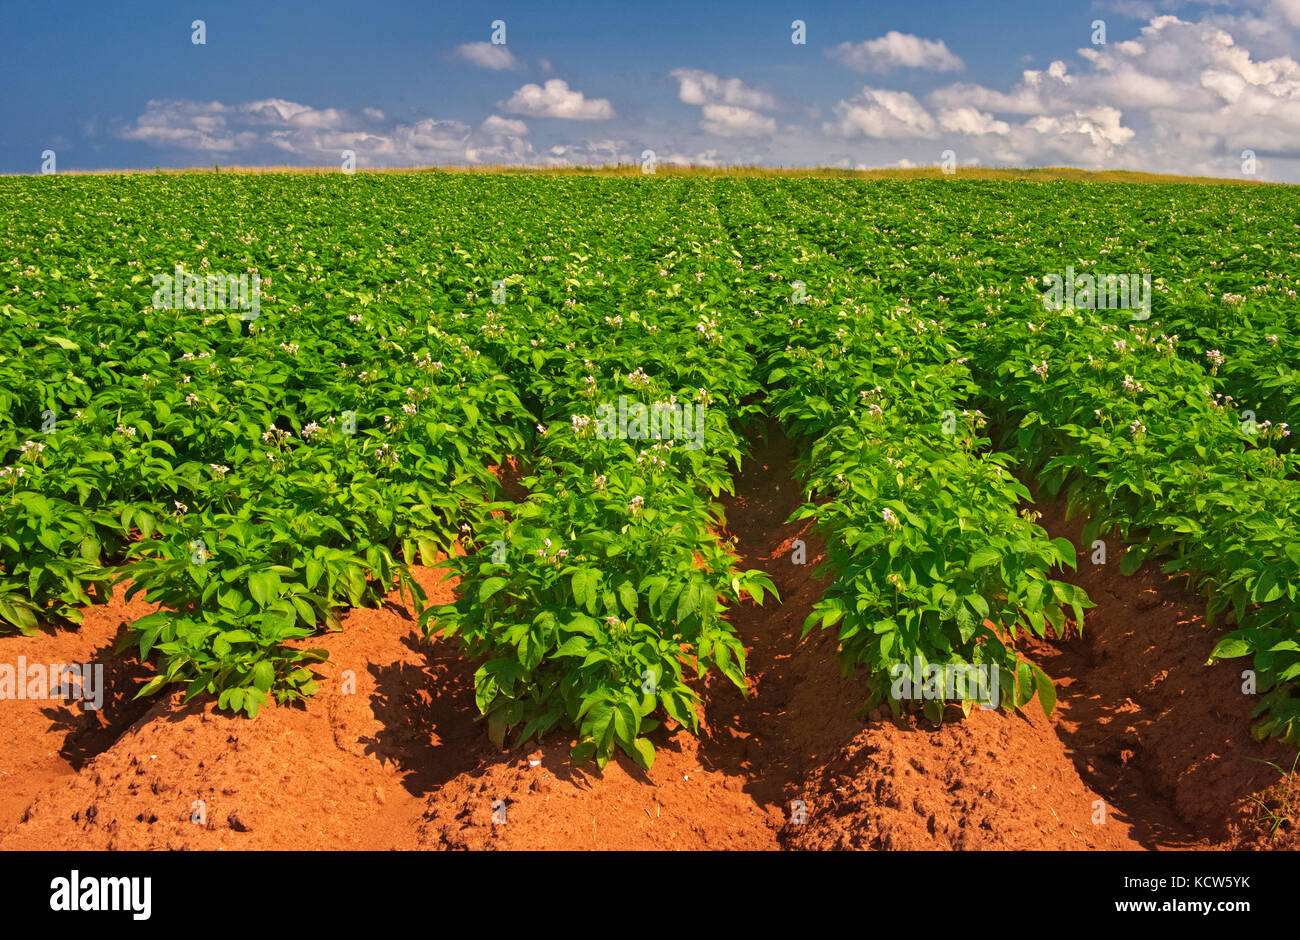 Potatoes and red soil, Cape Tryon, Prince Edward Island, Canada Stock Photo